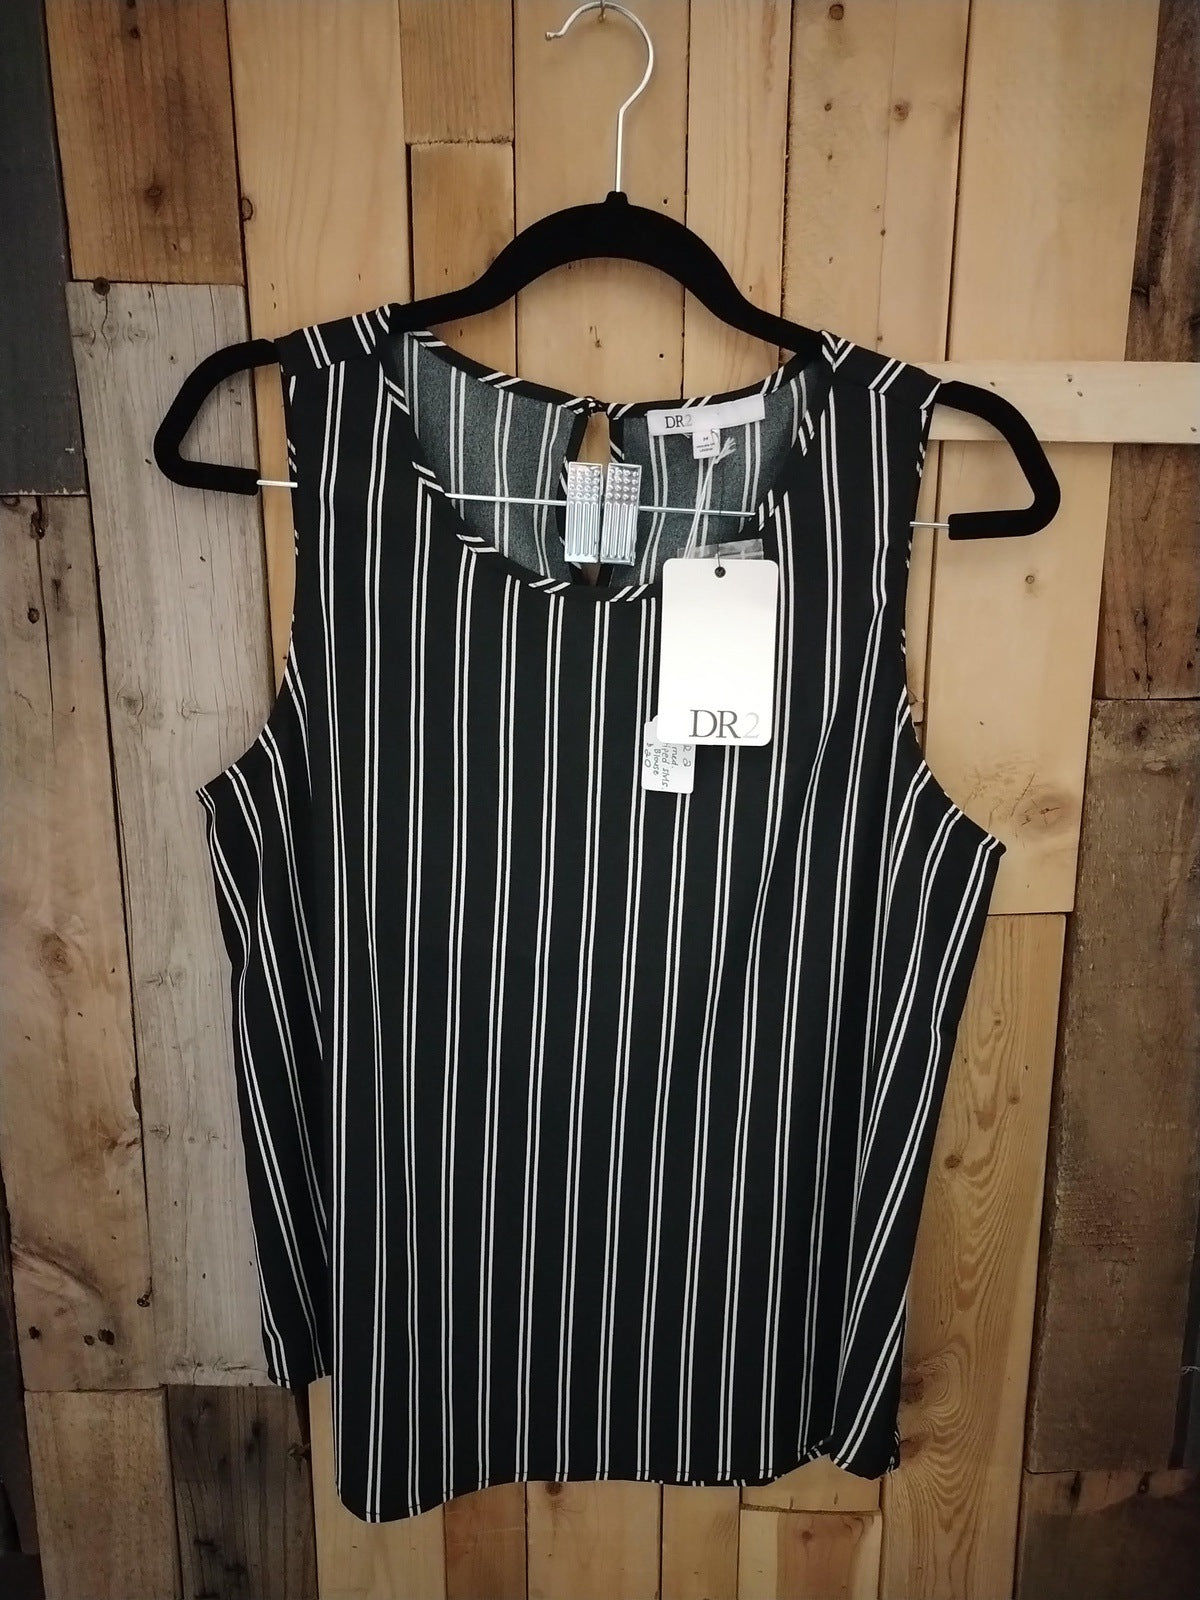 DR 2 Women's Striped Sleeveless Blouse Size Medium New with Tags